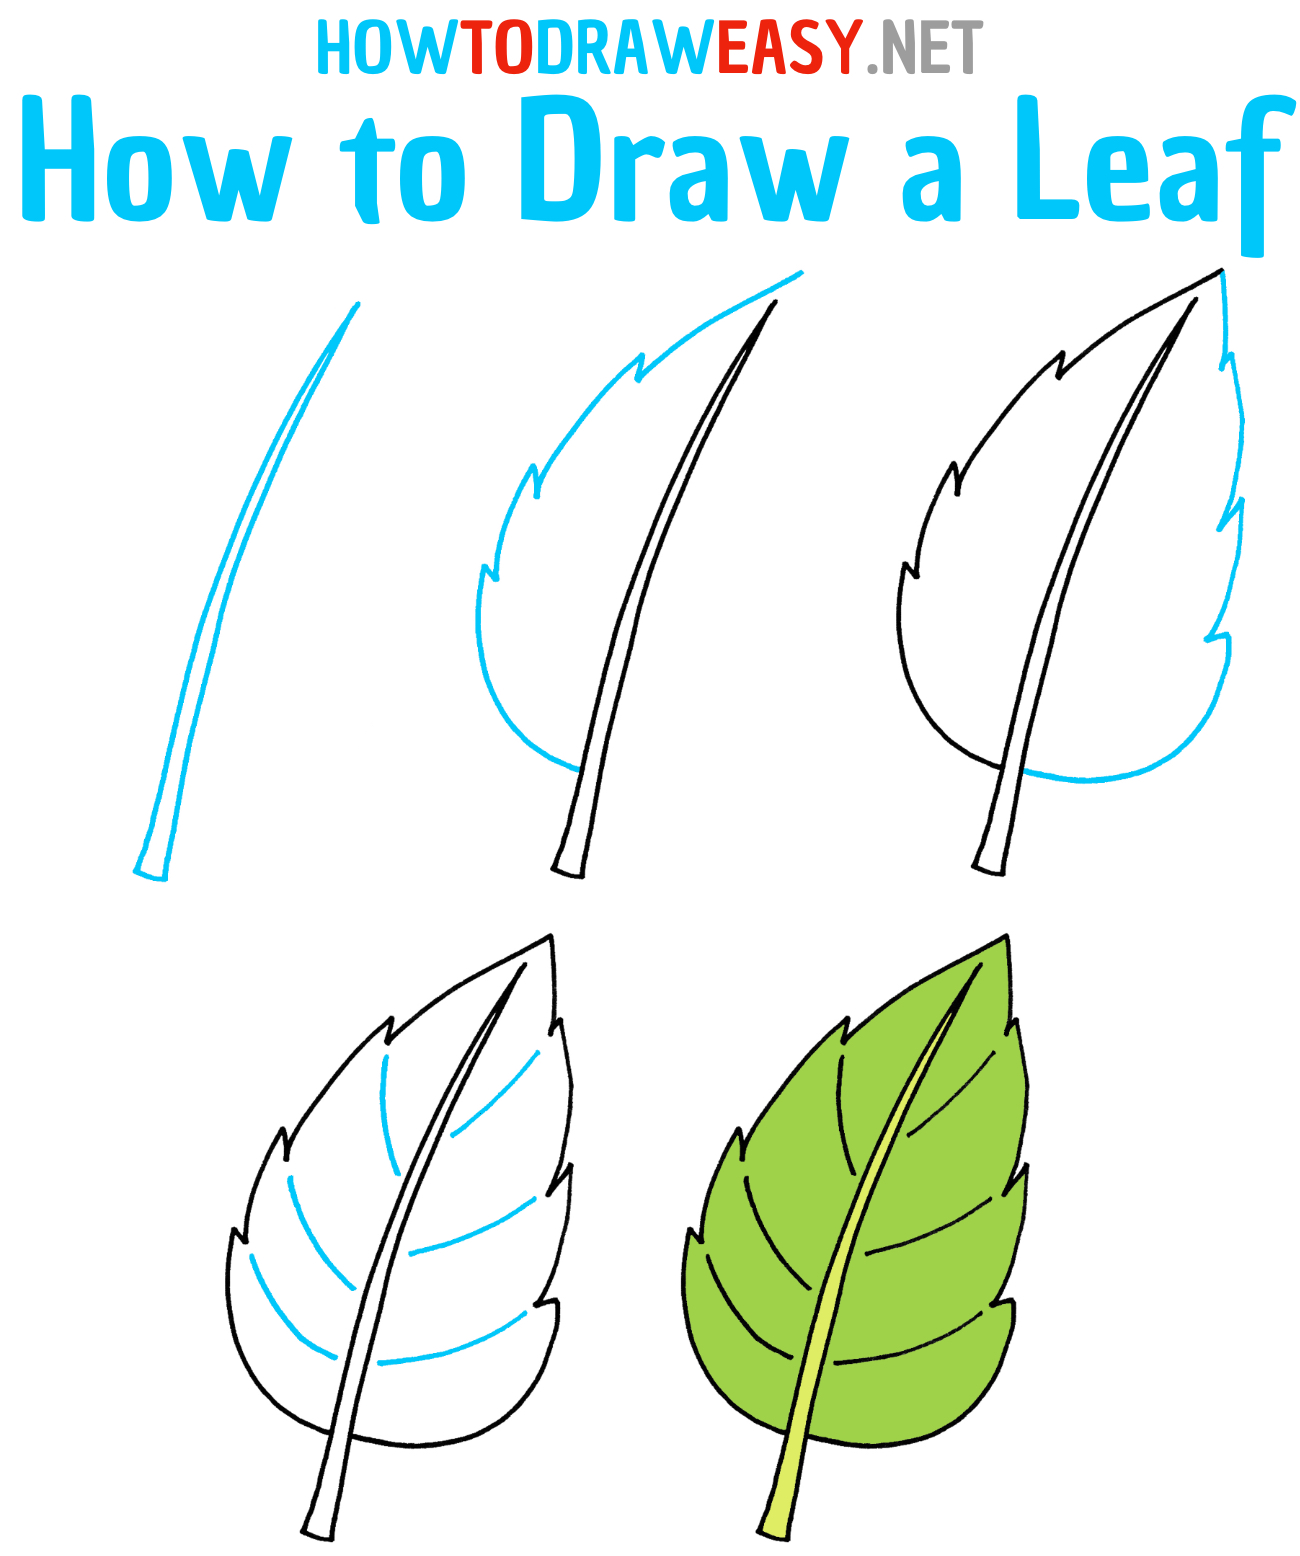 How to Draw a Leaf Step by Step